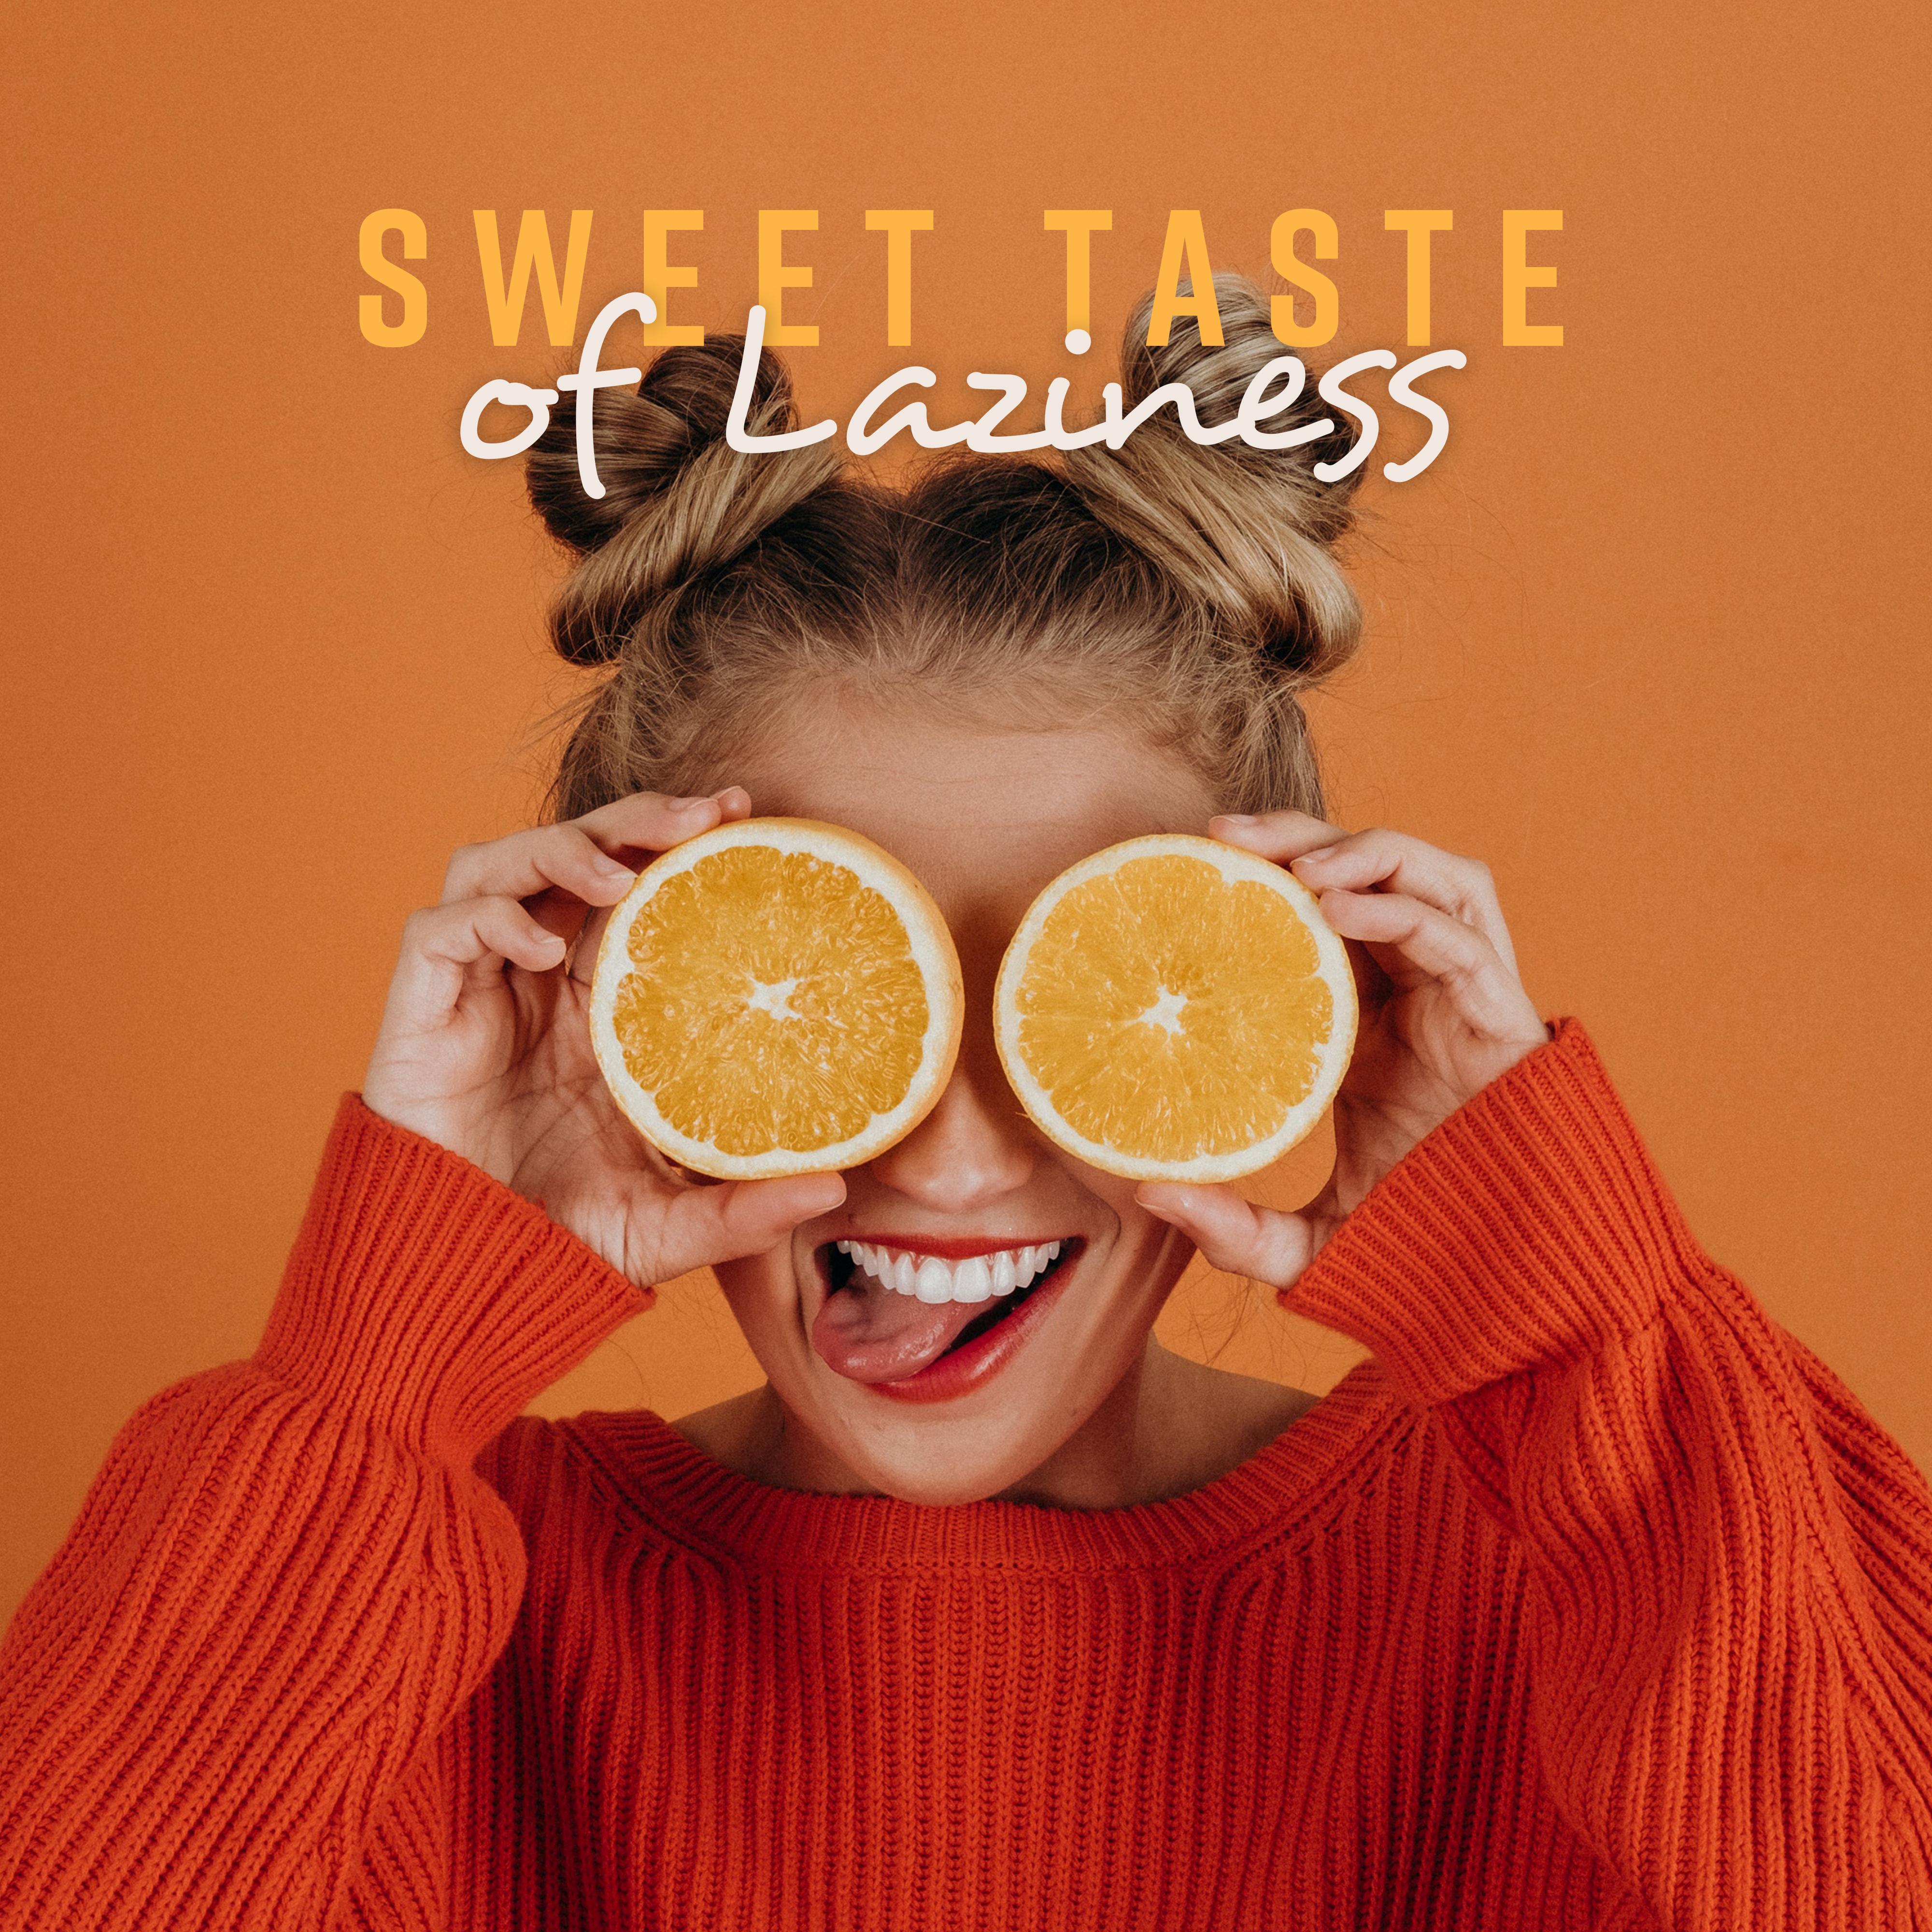 Sweet Taste of Laziness: Music for Days Off from Work and Duties, to Rest, Relax and Chill Out